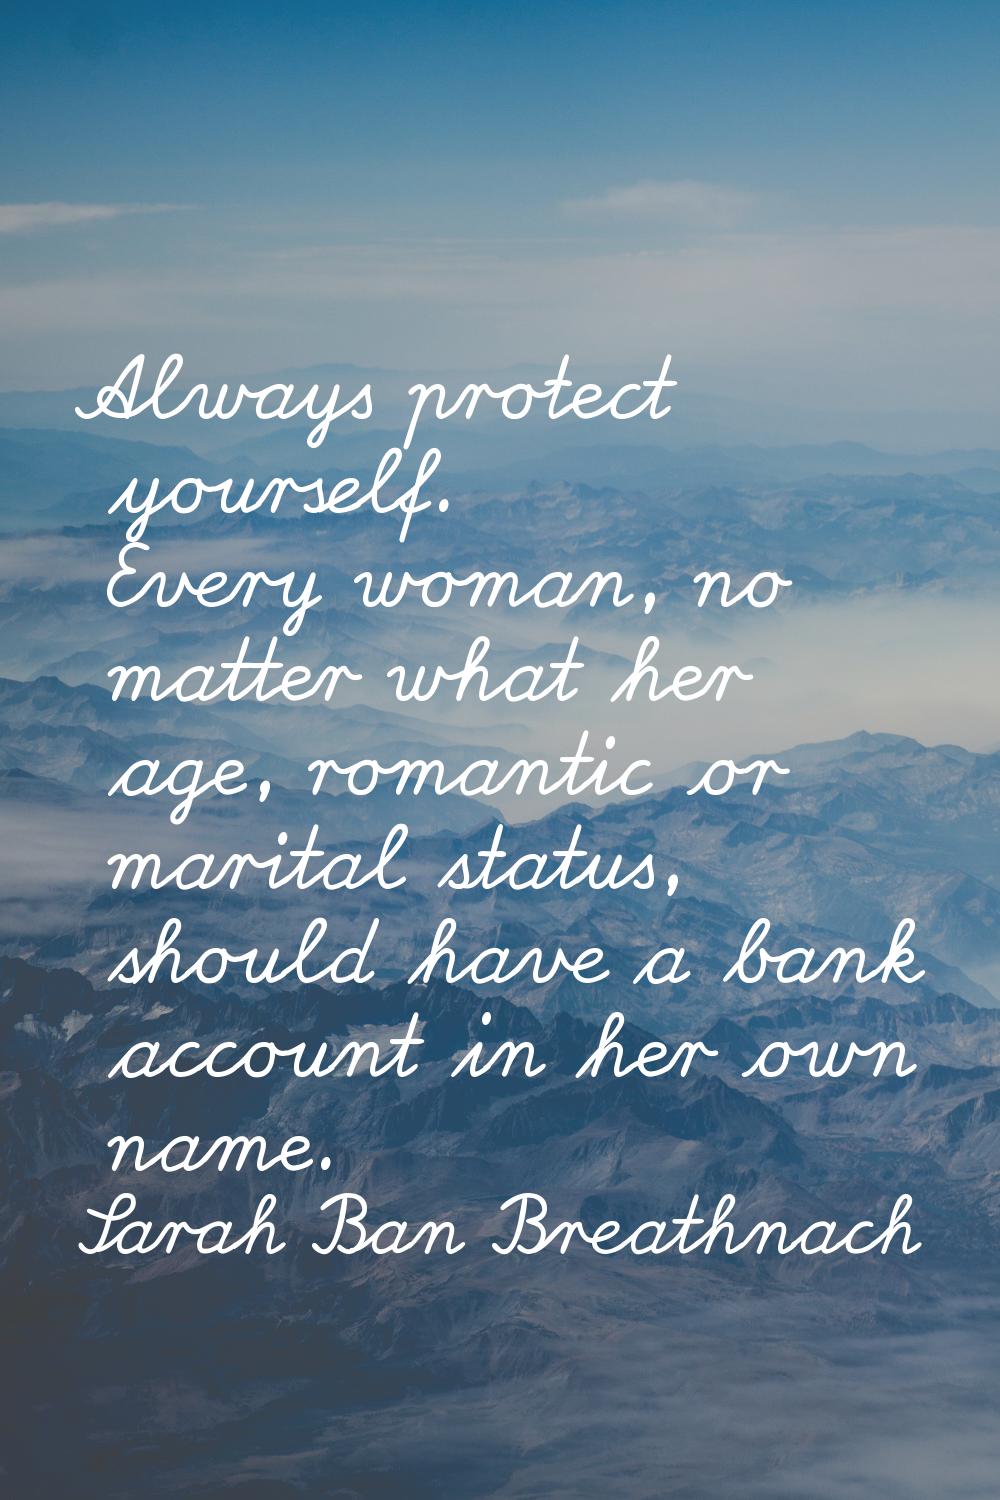 Always protect yourself. Every woman, no matter what her age, romantic or marital status, should ha